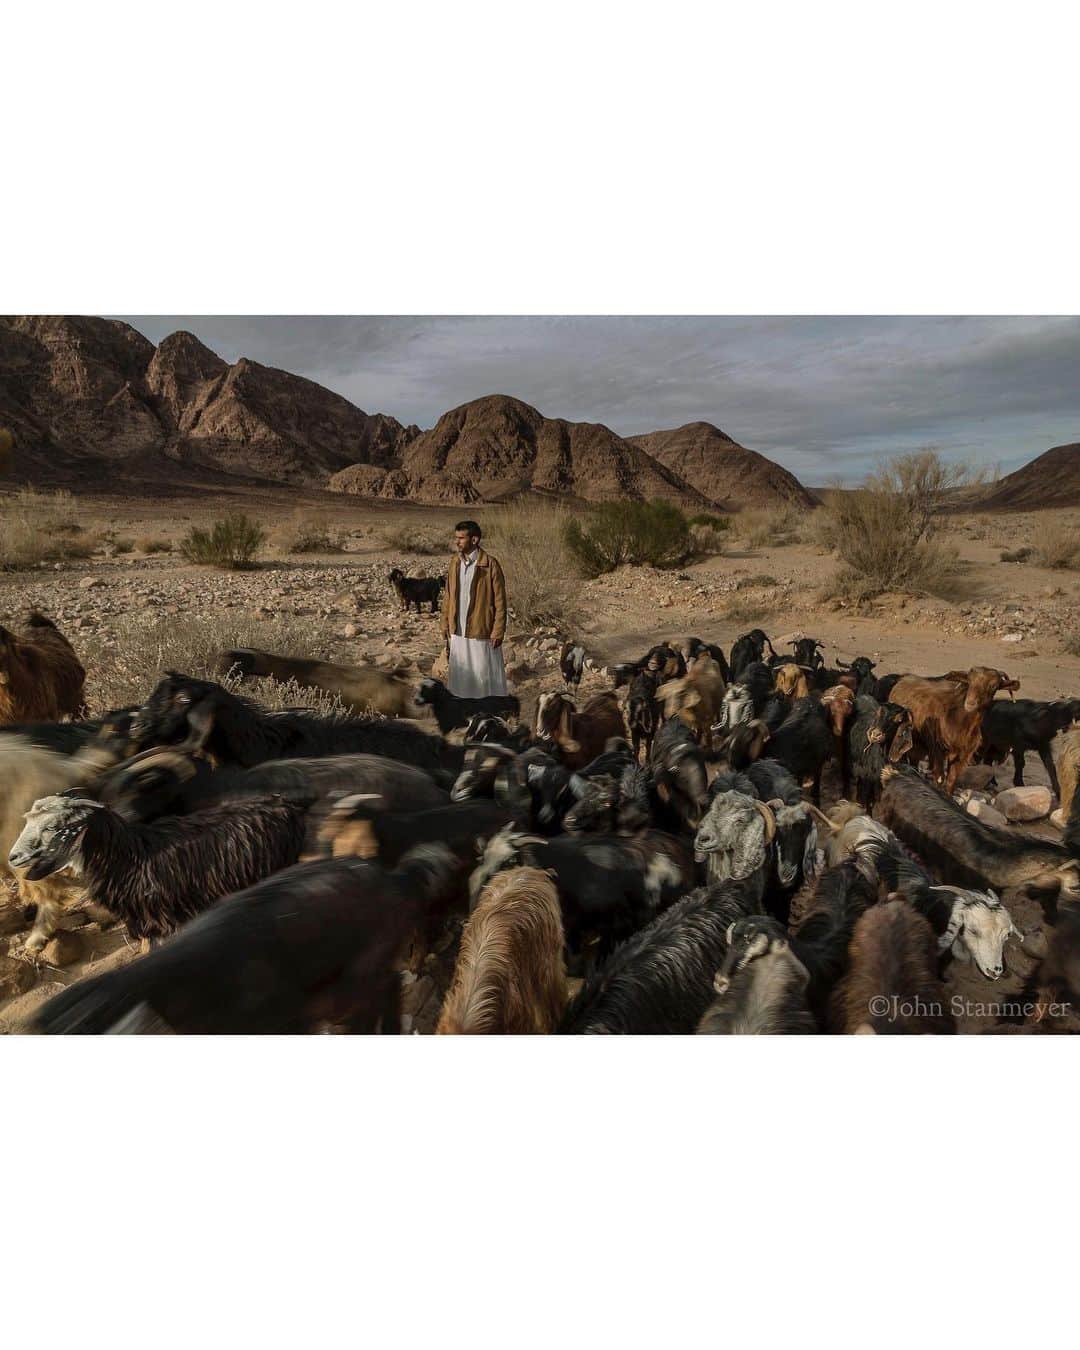 ジョン・スタンメイヤーさんのインスタグラム写真 - (ジョン・スタンメイヤーInstagram)「I was returning through Wadi Hafeer with Salmeh. We had been walking awhile through this windswept wadi (valley) with his animals, chatting. Salmeh in broken English, me in ruinous Arabic, mostly listening to the silence and the "maah's" of his goats. Everywhere in this ravine were petroglyphs. I consider such carvings part of the earliest form of journalism, the New York Times and Corriere della Sera' of the day, publishing on stones over 8000 years ago. Through this wadi, our ancestors began to walk some 60,000 years ago. In many ways, we are hardly different from when we started our human migration from lands further south in what today we call the Horn of Africa. Our primary distinction is the borders we've created since, dividing us. When we neared his encampment, a family of bedouins who prefer to live in nature, not the cities in southern Jordan, Salmeh's wife called out. He stopped briefly to listen, but the herd was too loud by their moving footsteps. In this natural cathedral, the sun spread near shadowless light inside the ravine and worn hills. At that moment, I felt timeless along the highway of our human existence. ⠀⠀⠀⠀⠀⠀⠀ from the @natgeo story #BlessedCursedClaimed @outofedenwalk #jordan #WadiHafeer #wadi #ravine #valley #goats #fromthearchive」12月28日 12時43分 - johnstanmeyer